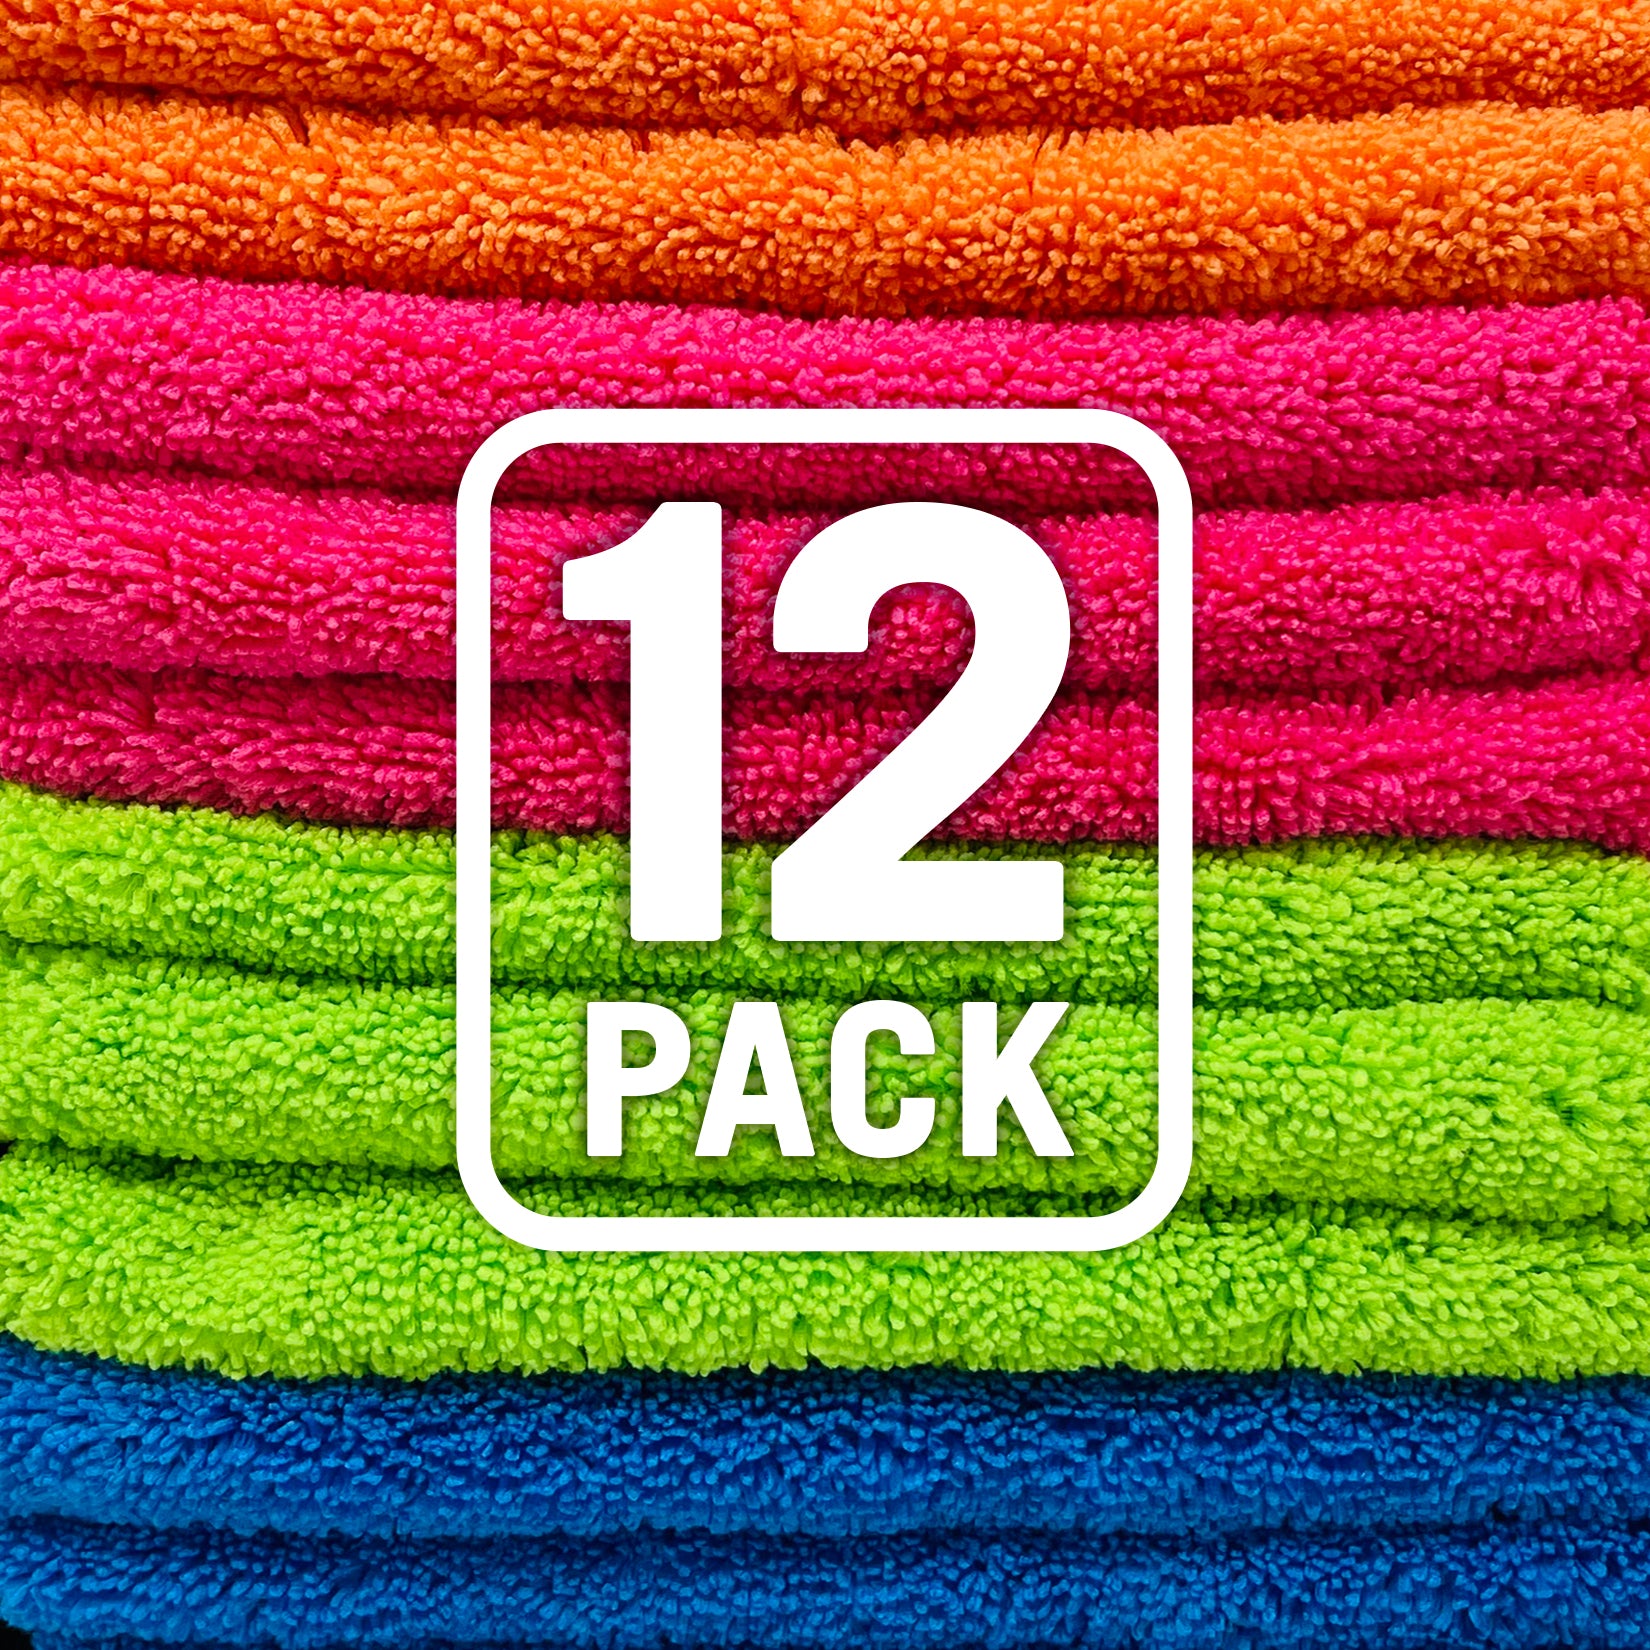 Microfiber Cleaning Cloths 400 GSM Thick Soft Lint Free 12x12 6 Pack  Green Blue and Orange Reusable Kitchen Towels Dust Cloth Rags for Window Car  House Boat Furniture Multi-colored